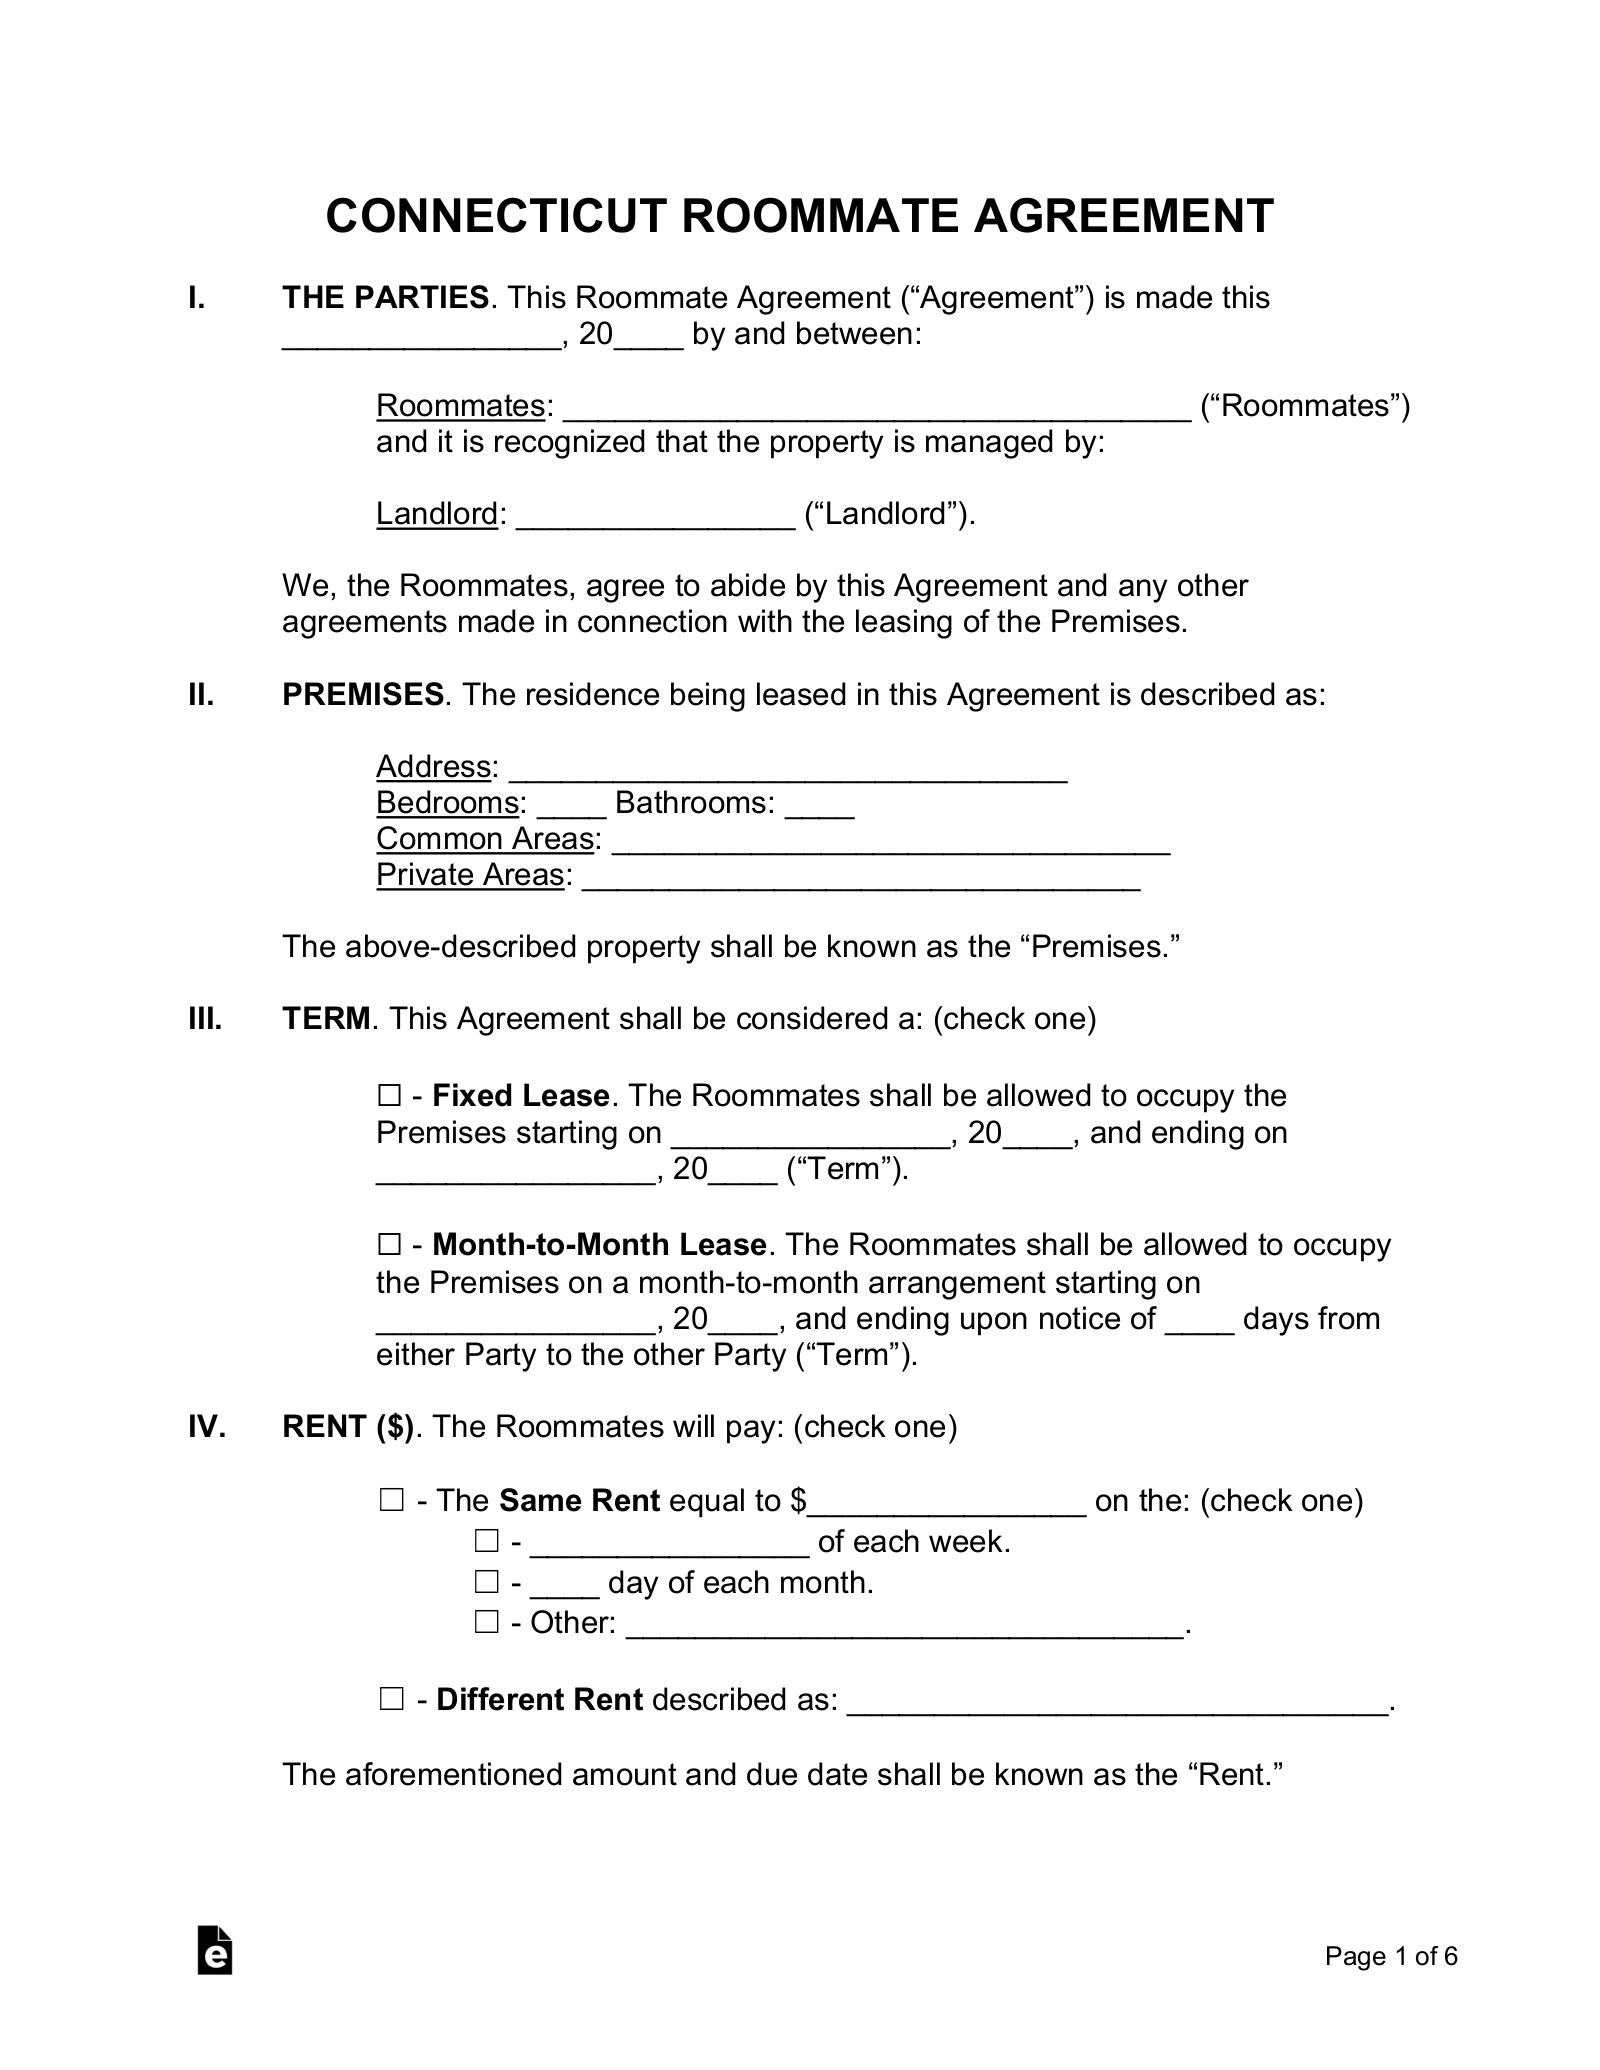 free connecticut roommate room rental agreement form word pdf